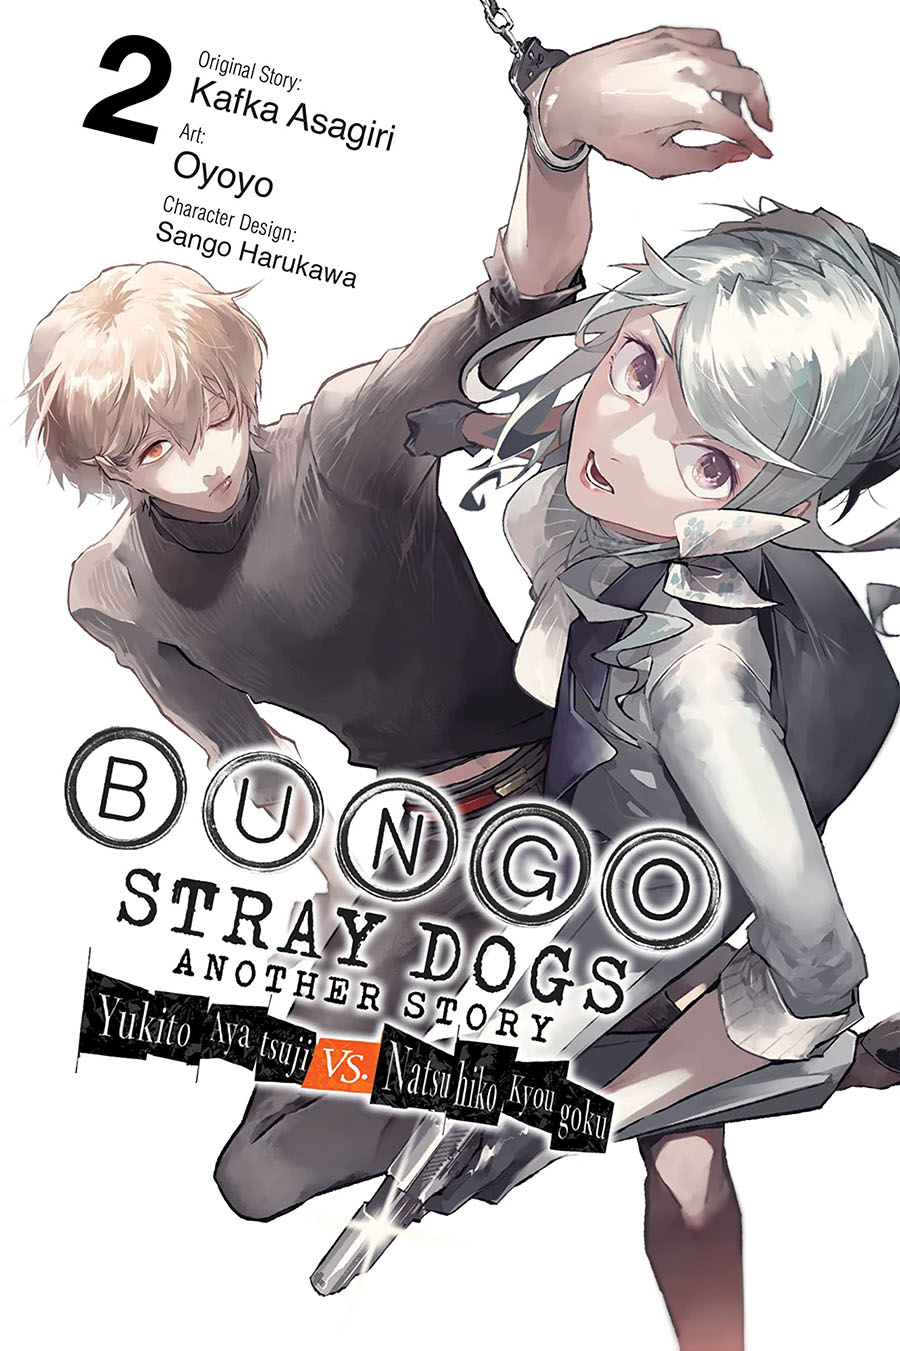 Bungo Stray Dogs Another Story Vol 2 GN